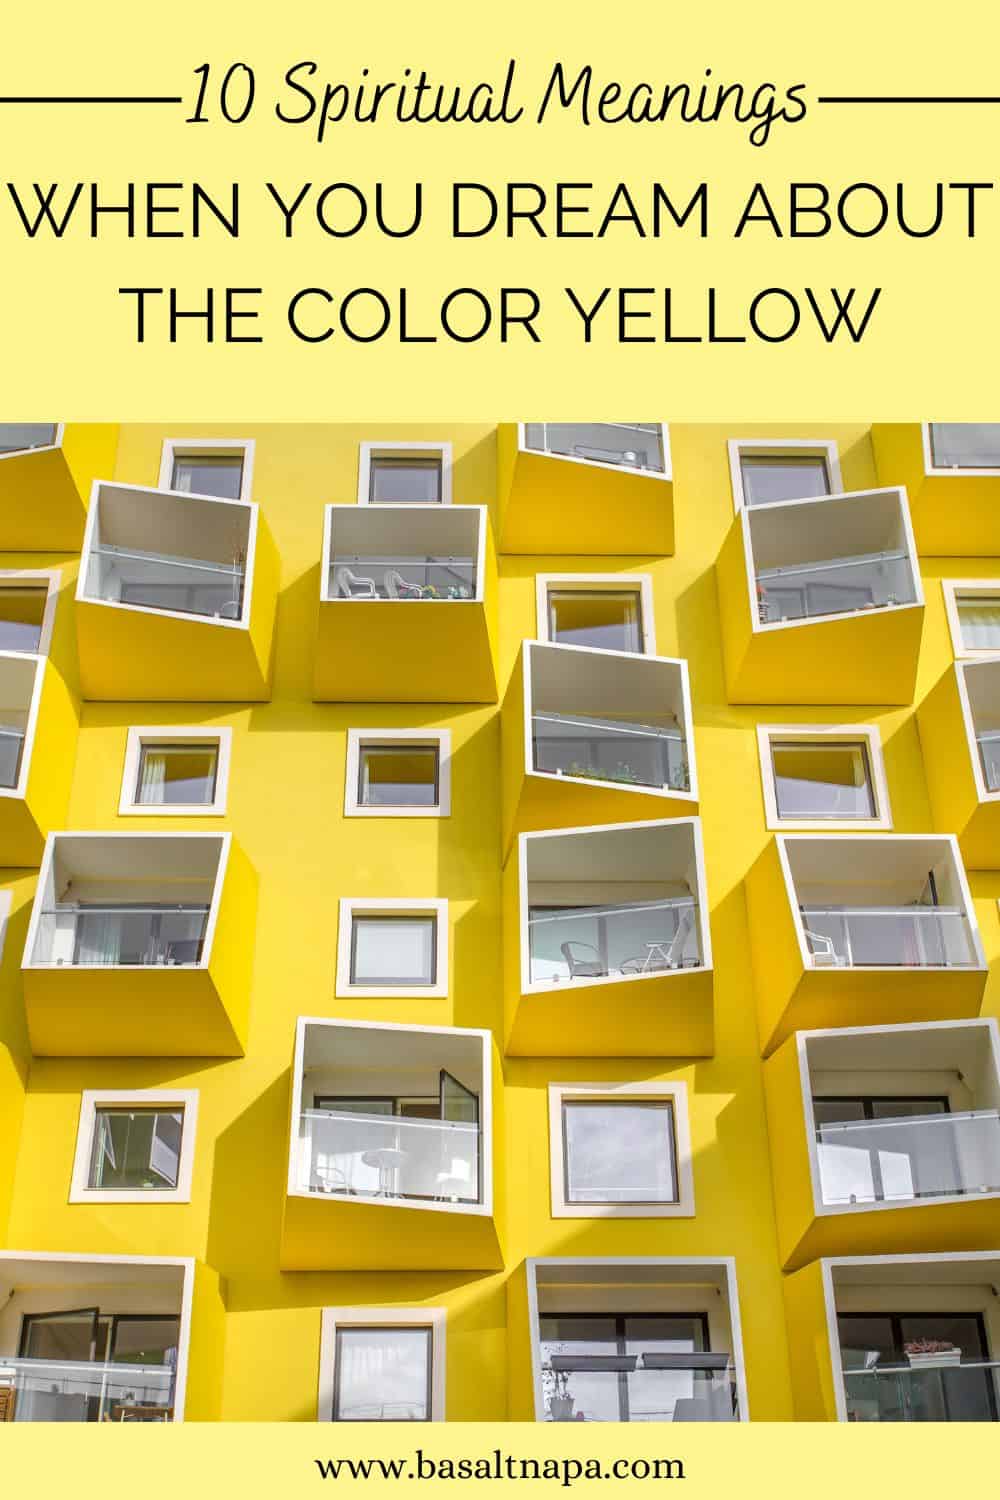 What does a dream about the color yellow mean